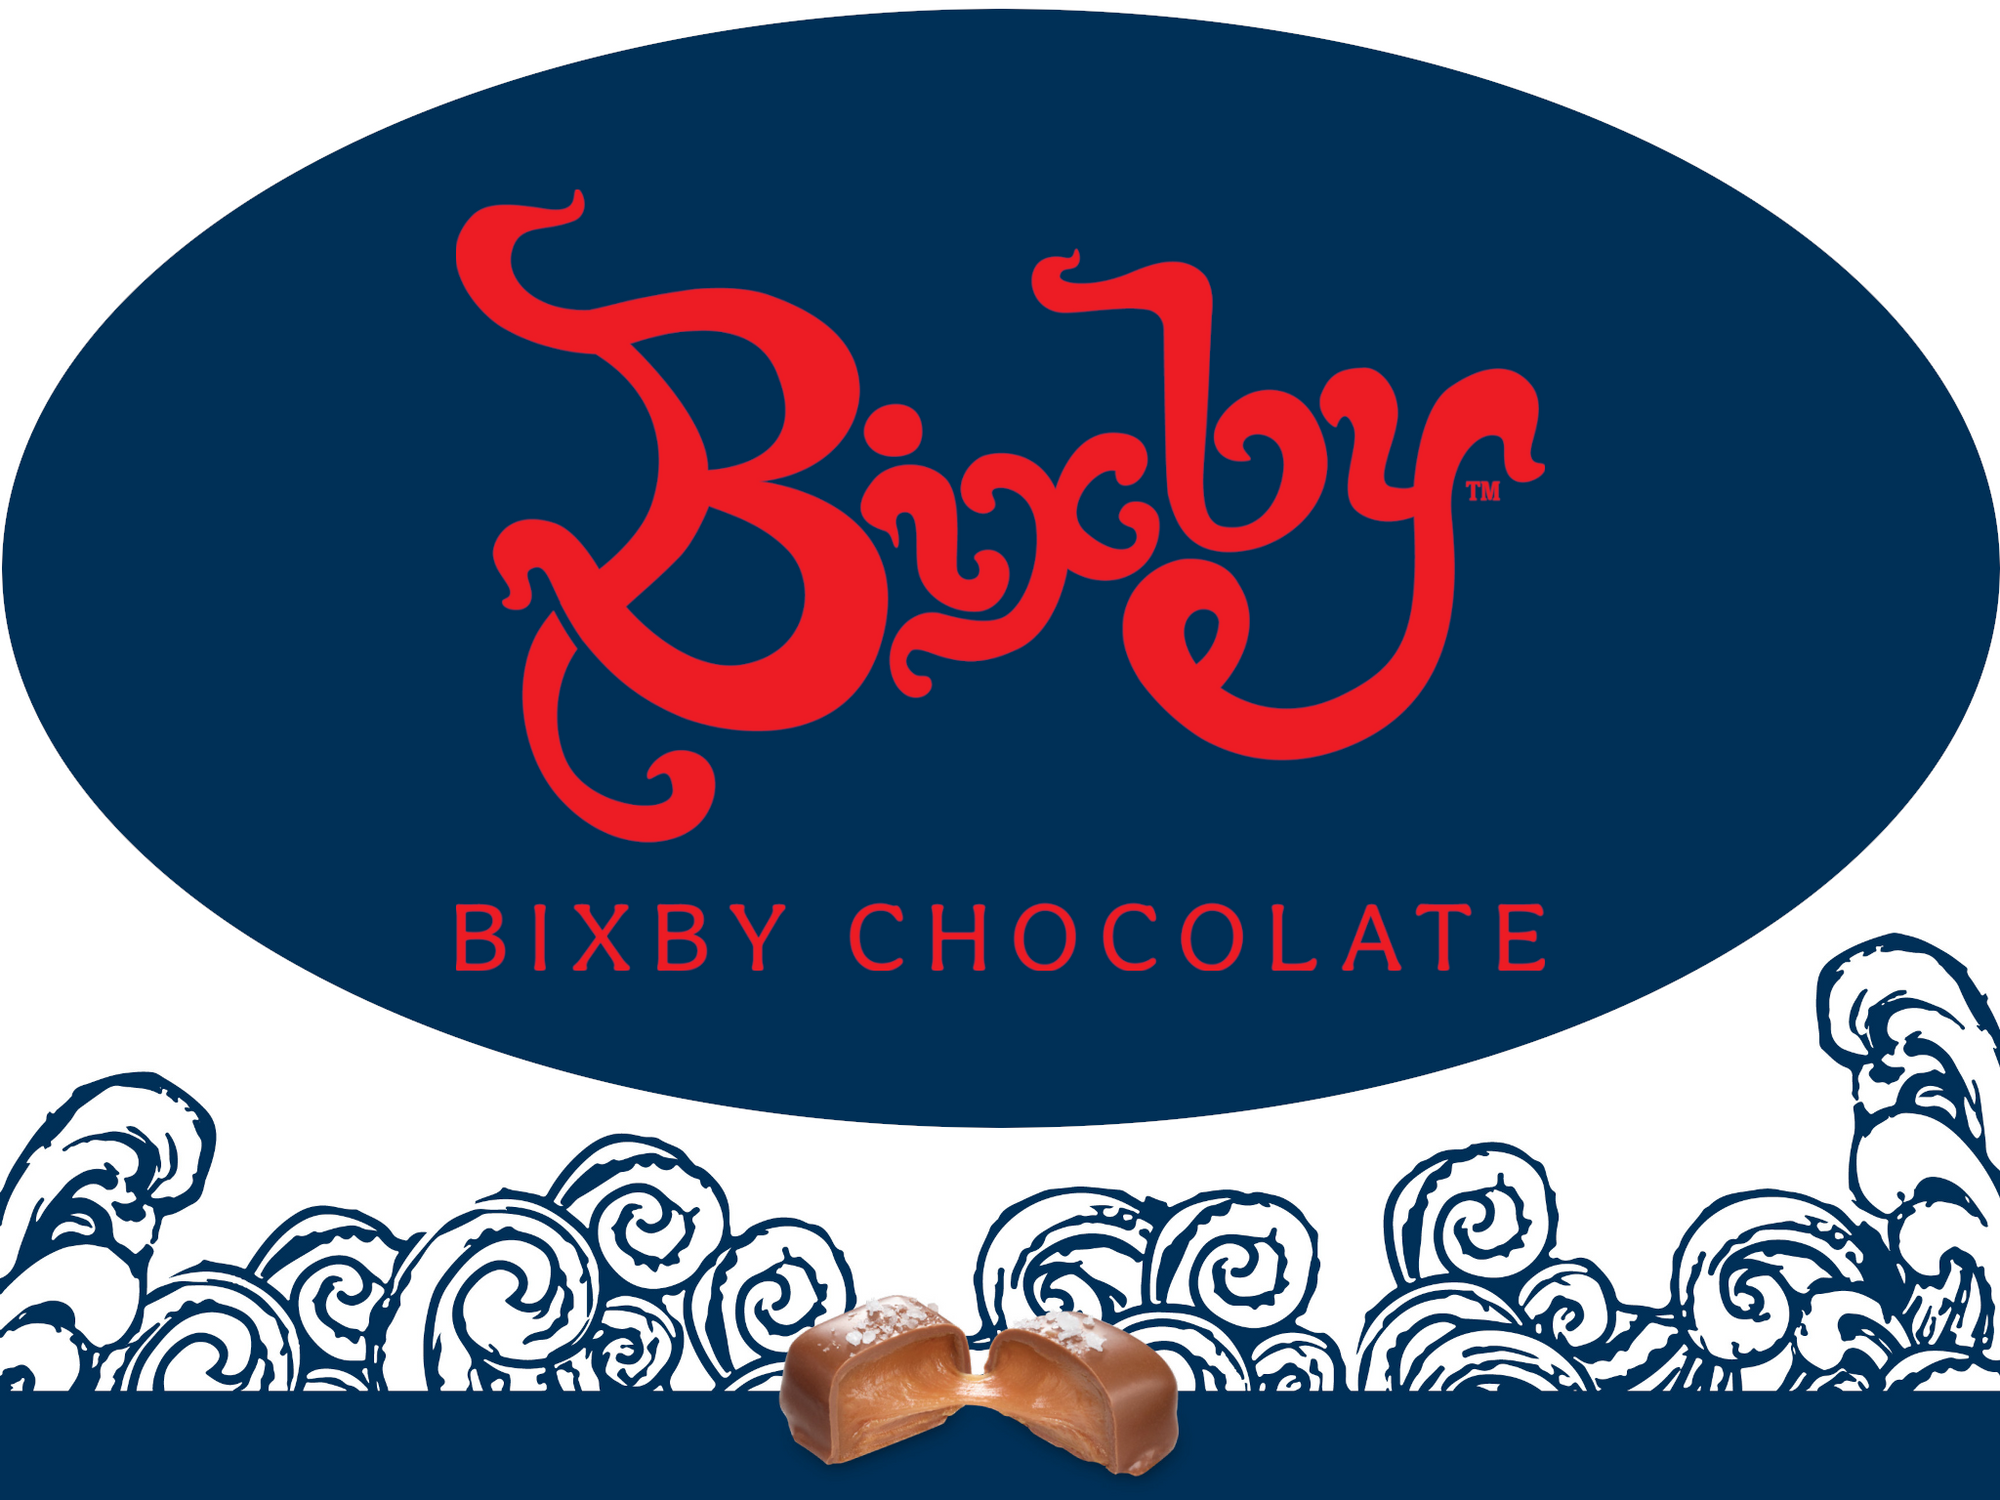 Episode 74 - Consult with Bixby Chocolate